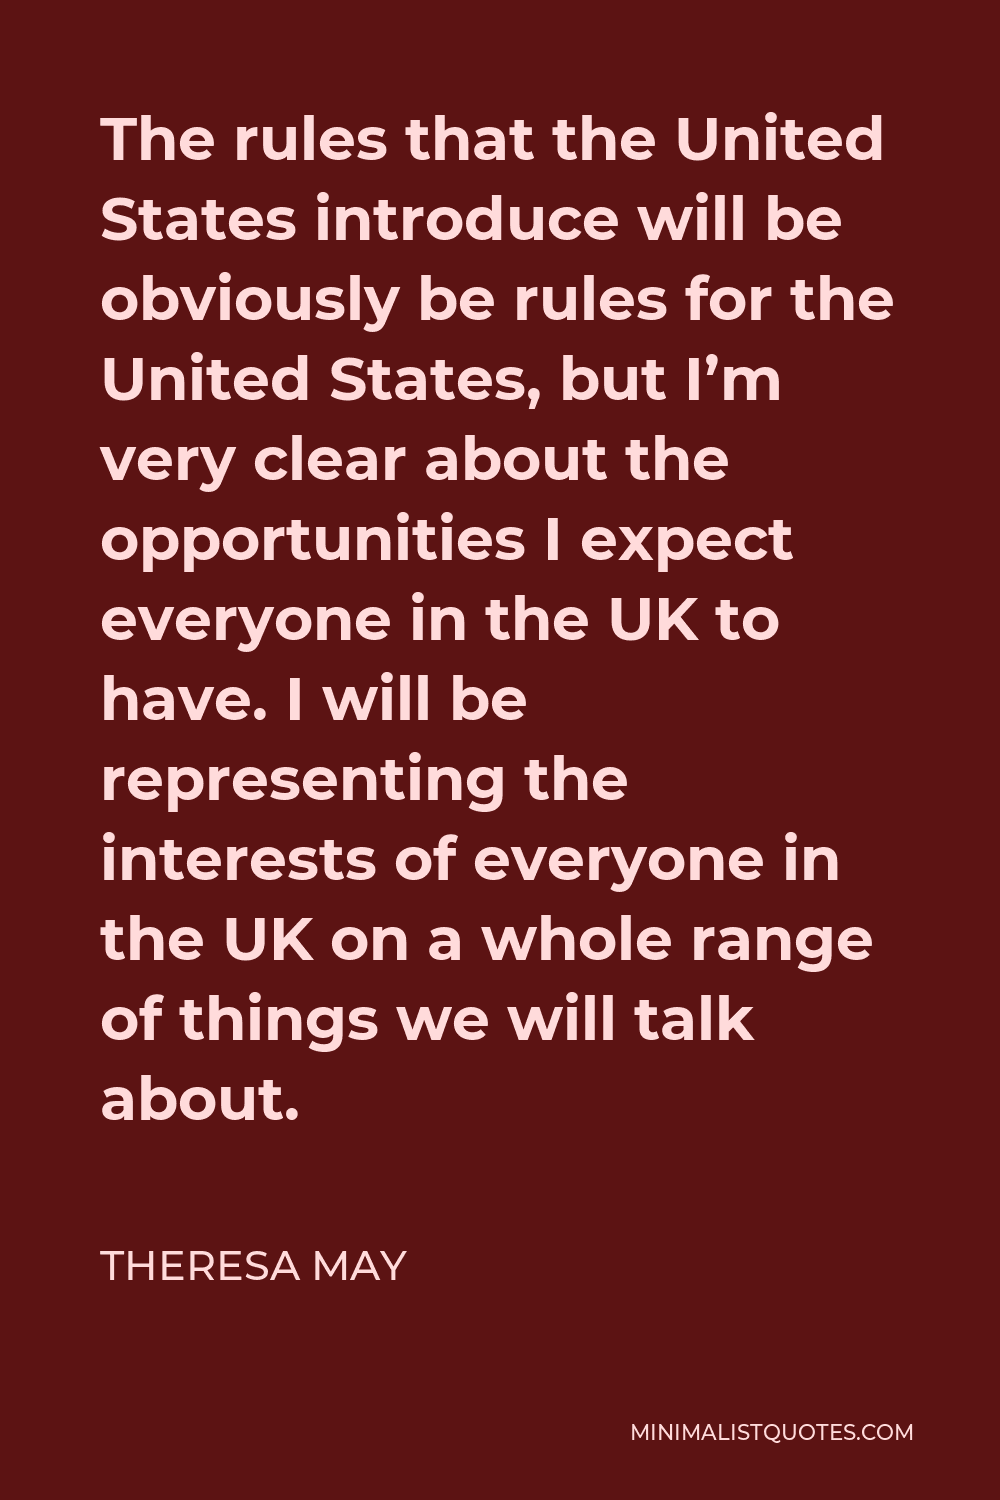 Theresa May Quote - The rules that the United States introduce will be obviously be rules for the United States, but I’m very clear about the opportunities I expect everyone in the UK to have. I will be representing the interests of everyone in the UK on a whole range of things we will talk about.